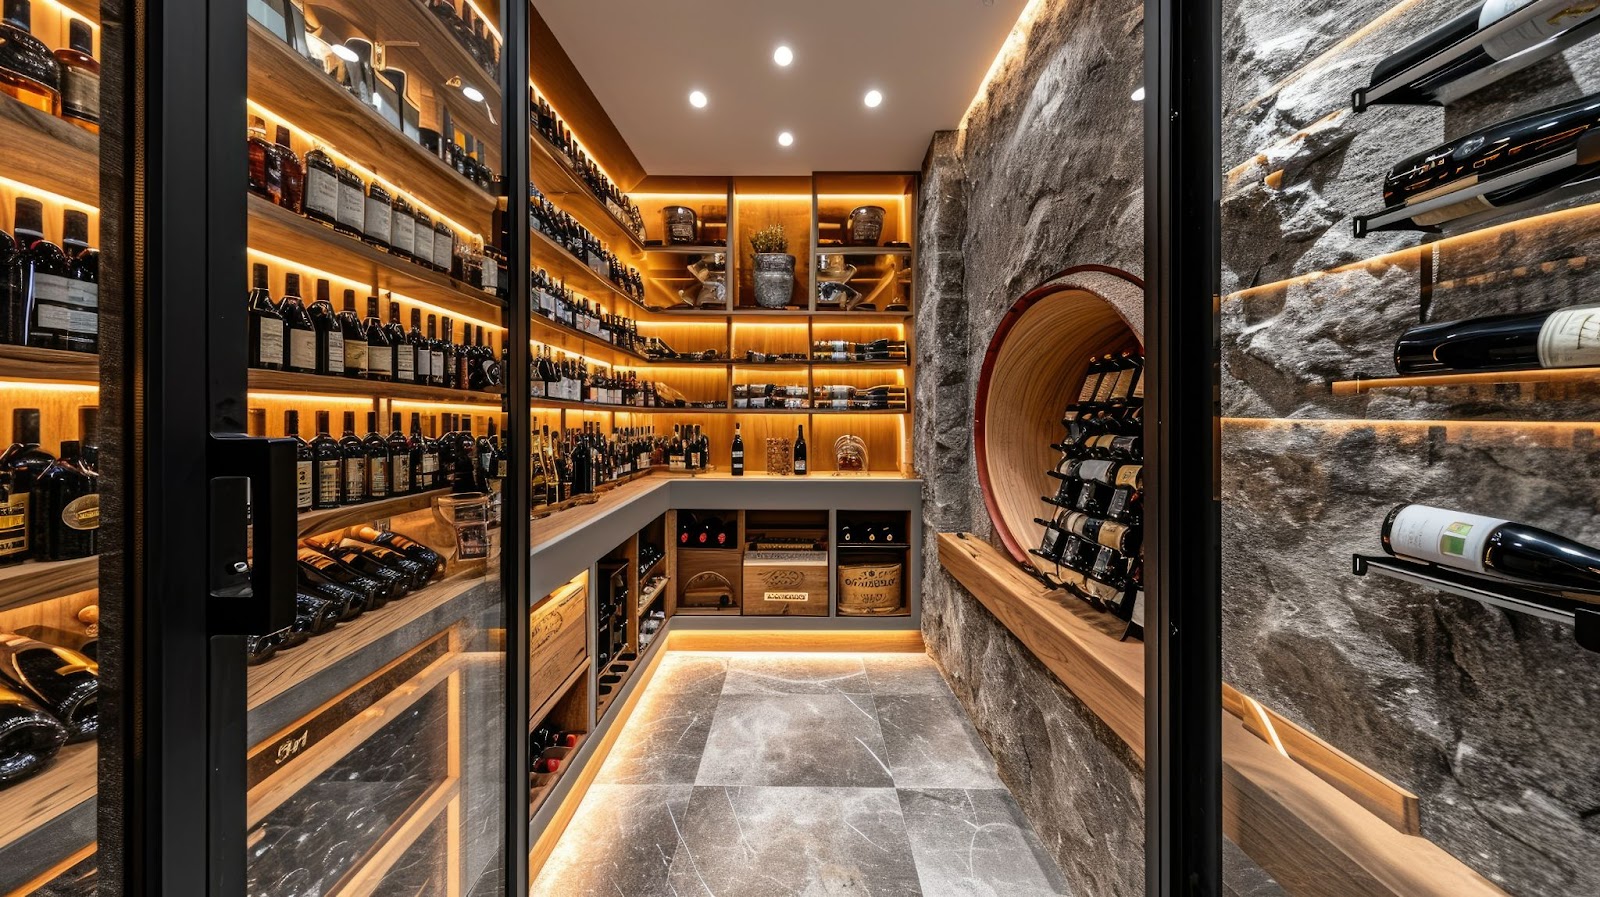 Stone wall and shelves in glass wine cellar with glass design.